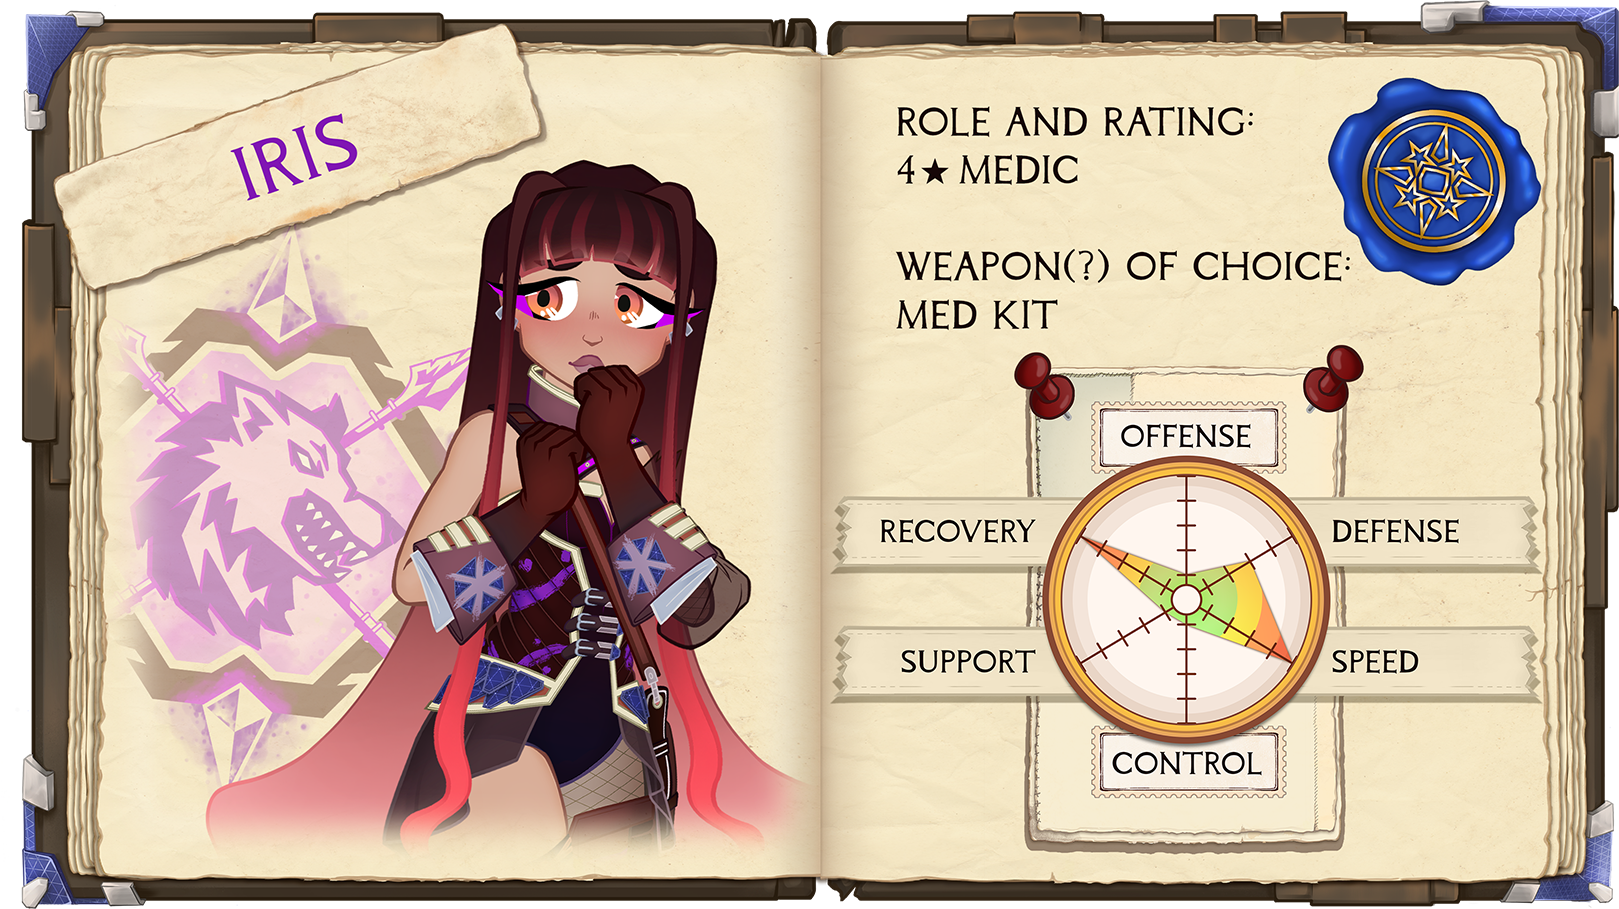 Iris. Role and Rating: 4 Star Medic. Weapon(?) of Choice: Med Kit: Offense: 1/5. Defense: 3/5. Speed: 5/5. Control: 1/5. Support: 1/5. Recovery: 5/5.